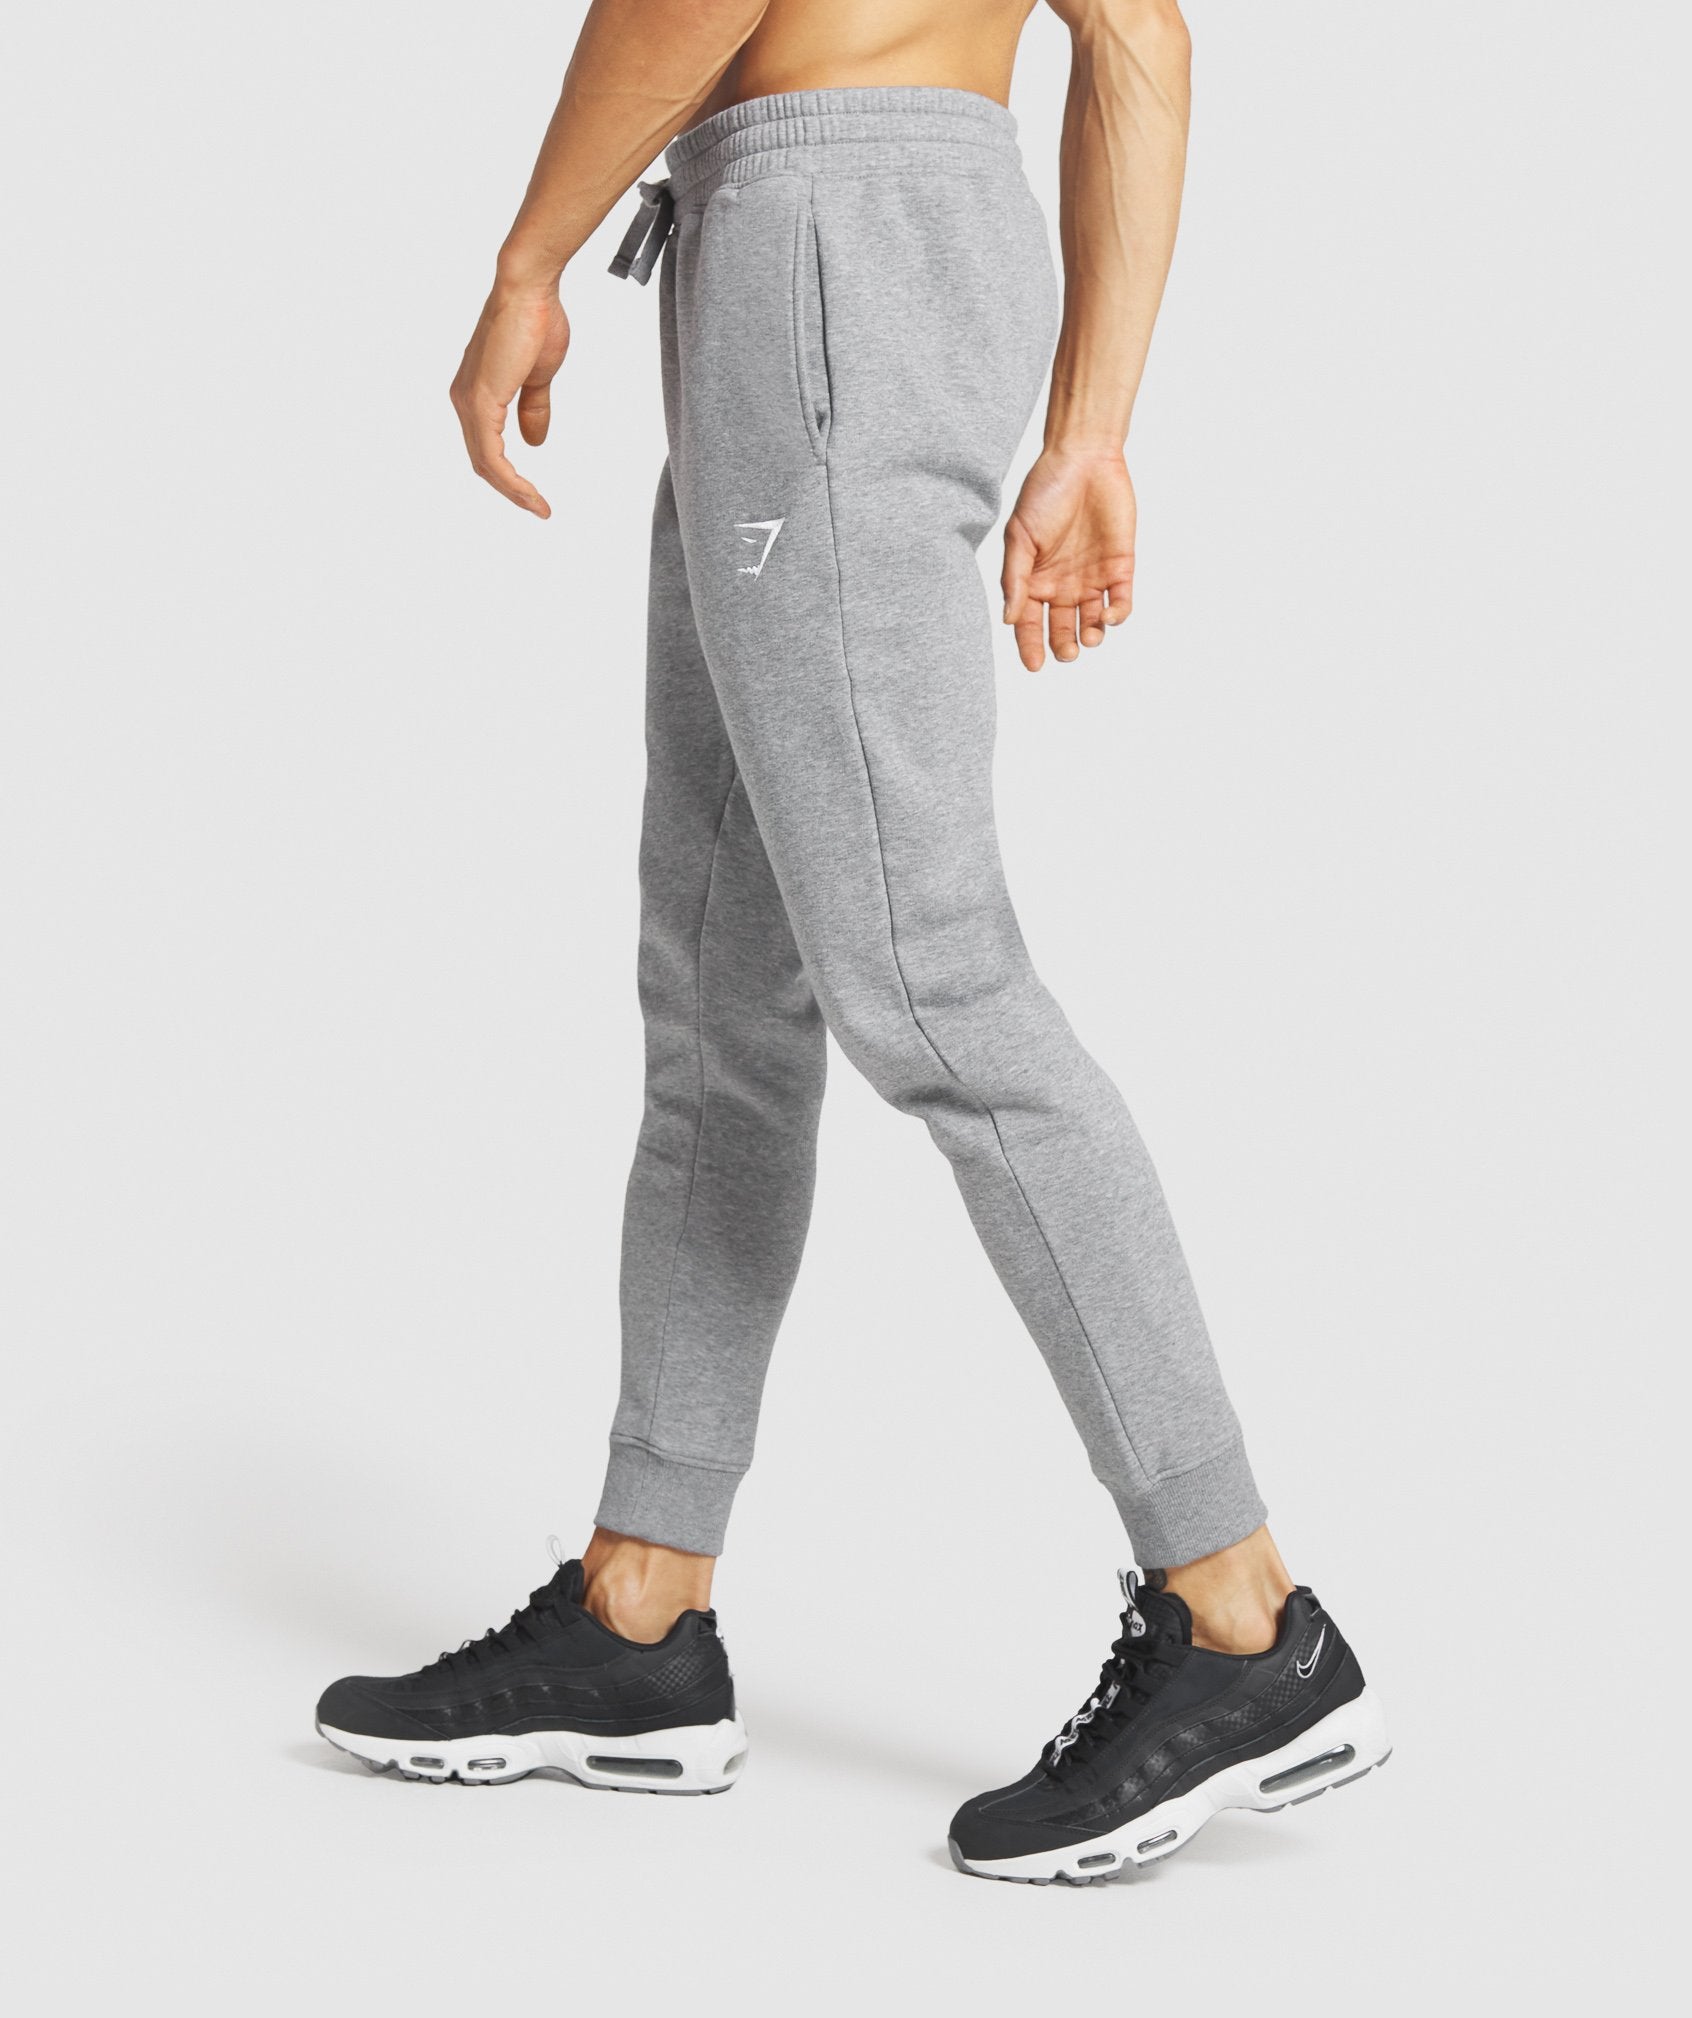 Crest Joggers in Charcoal Marl - view 4